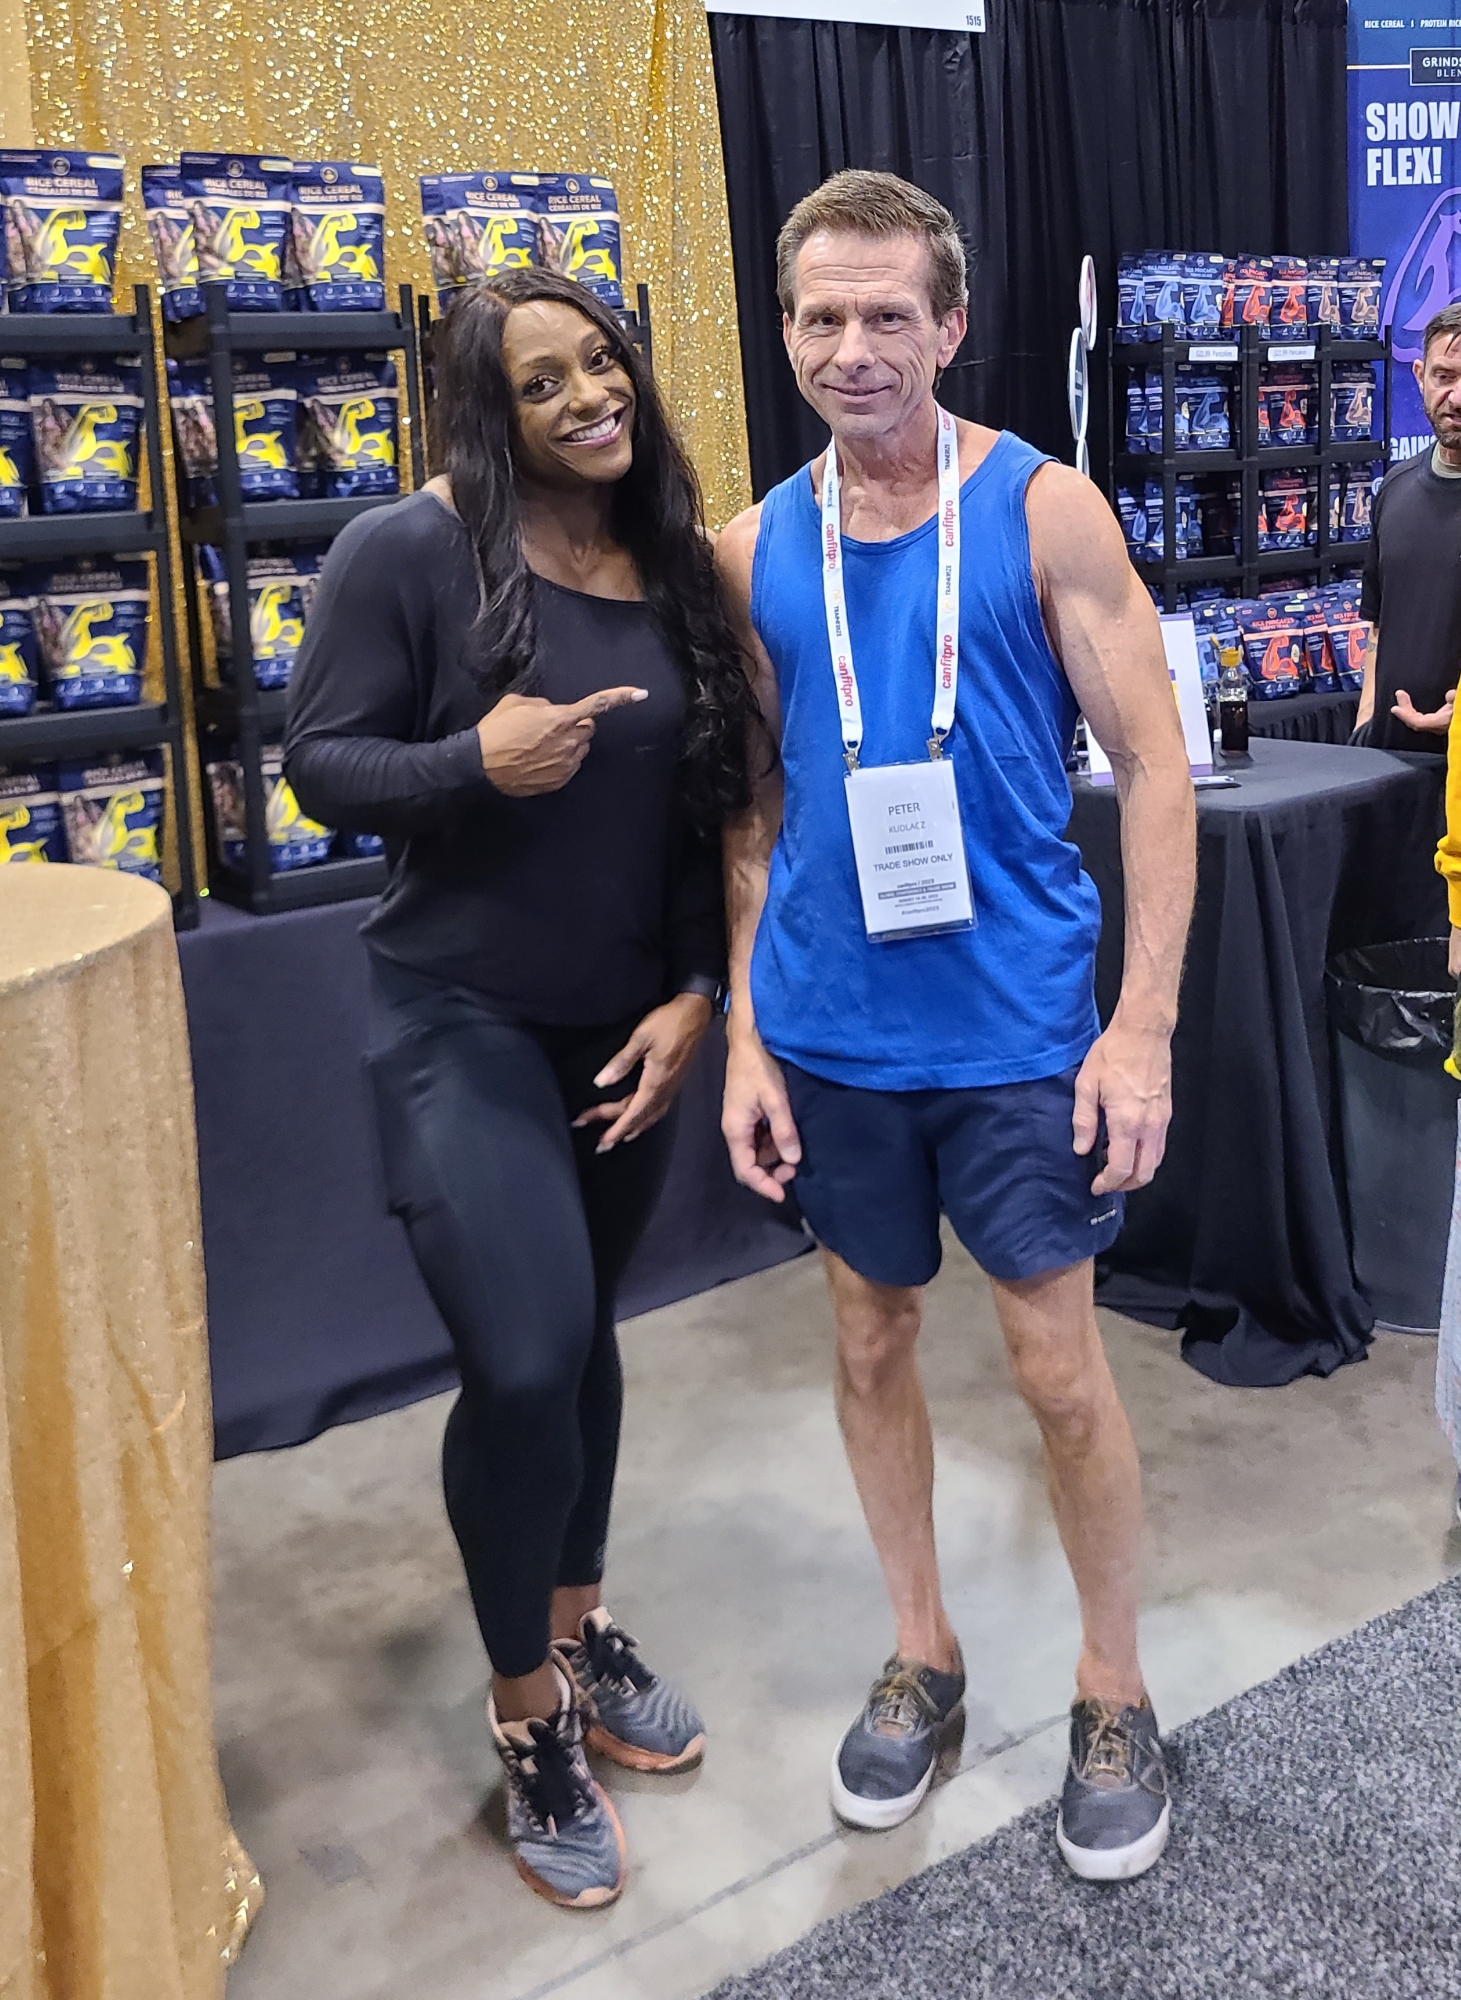 Andrea Shaw - Ms Olympia with me